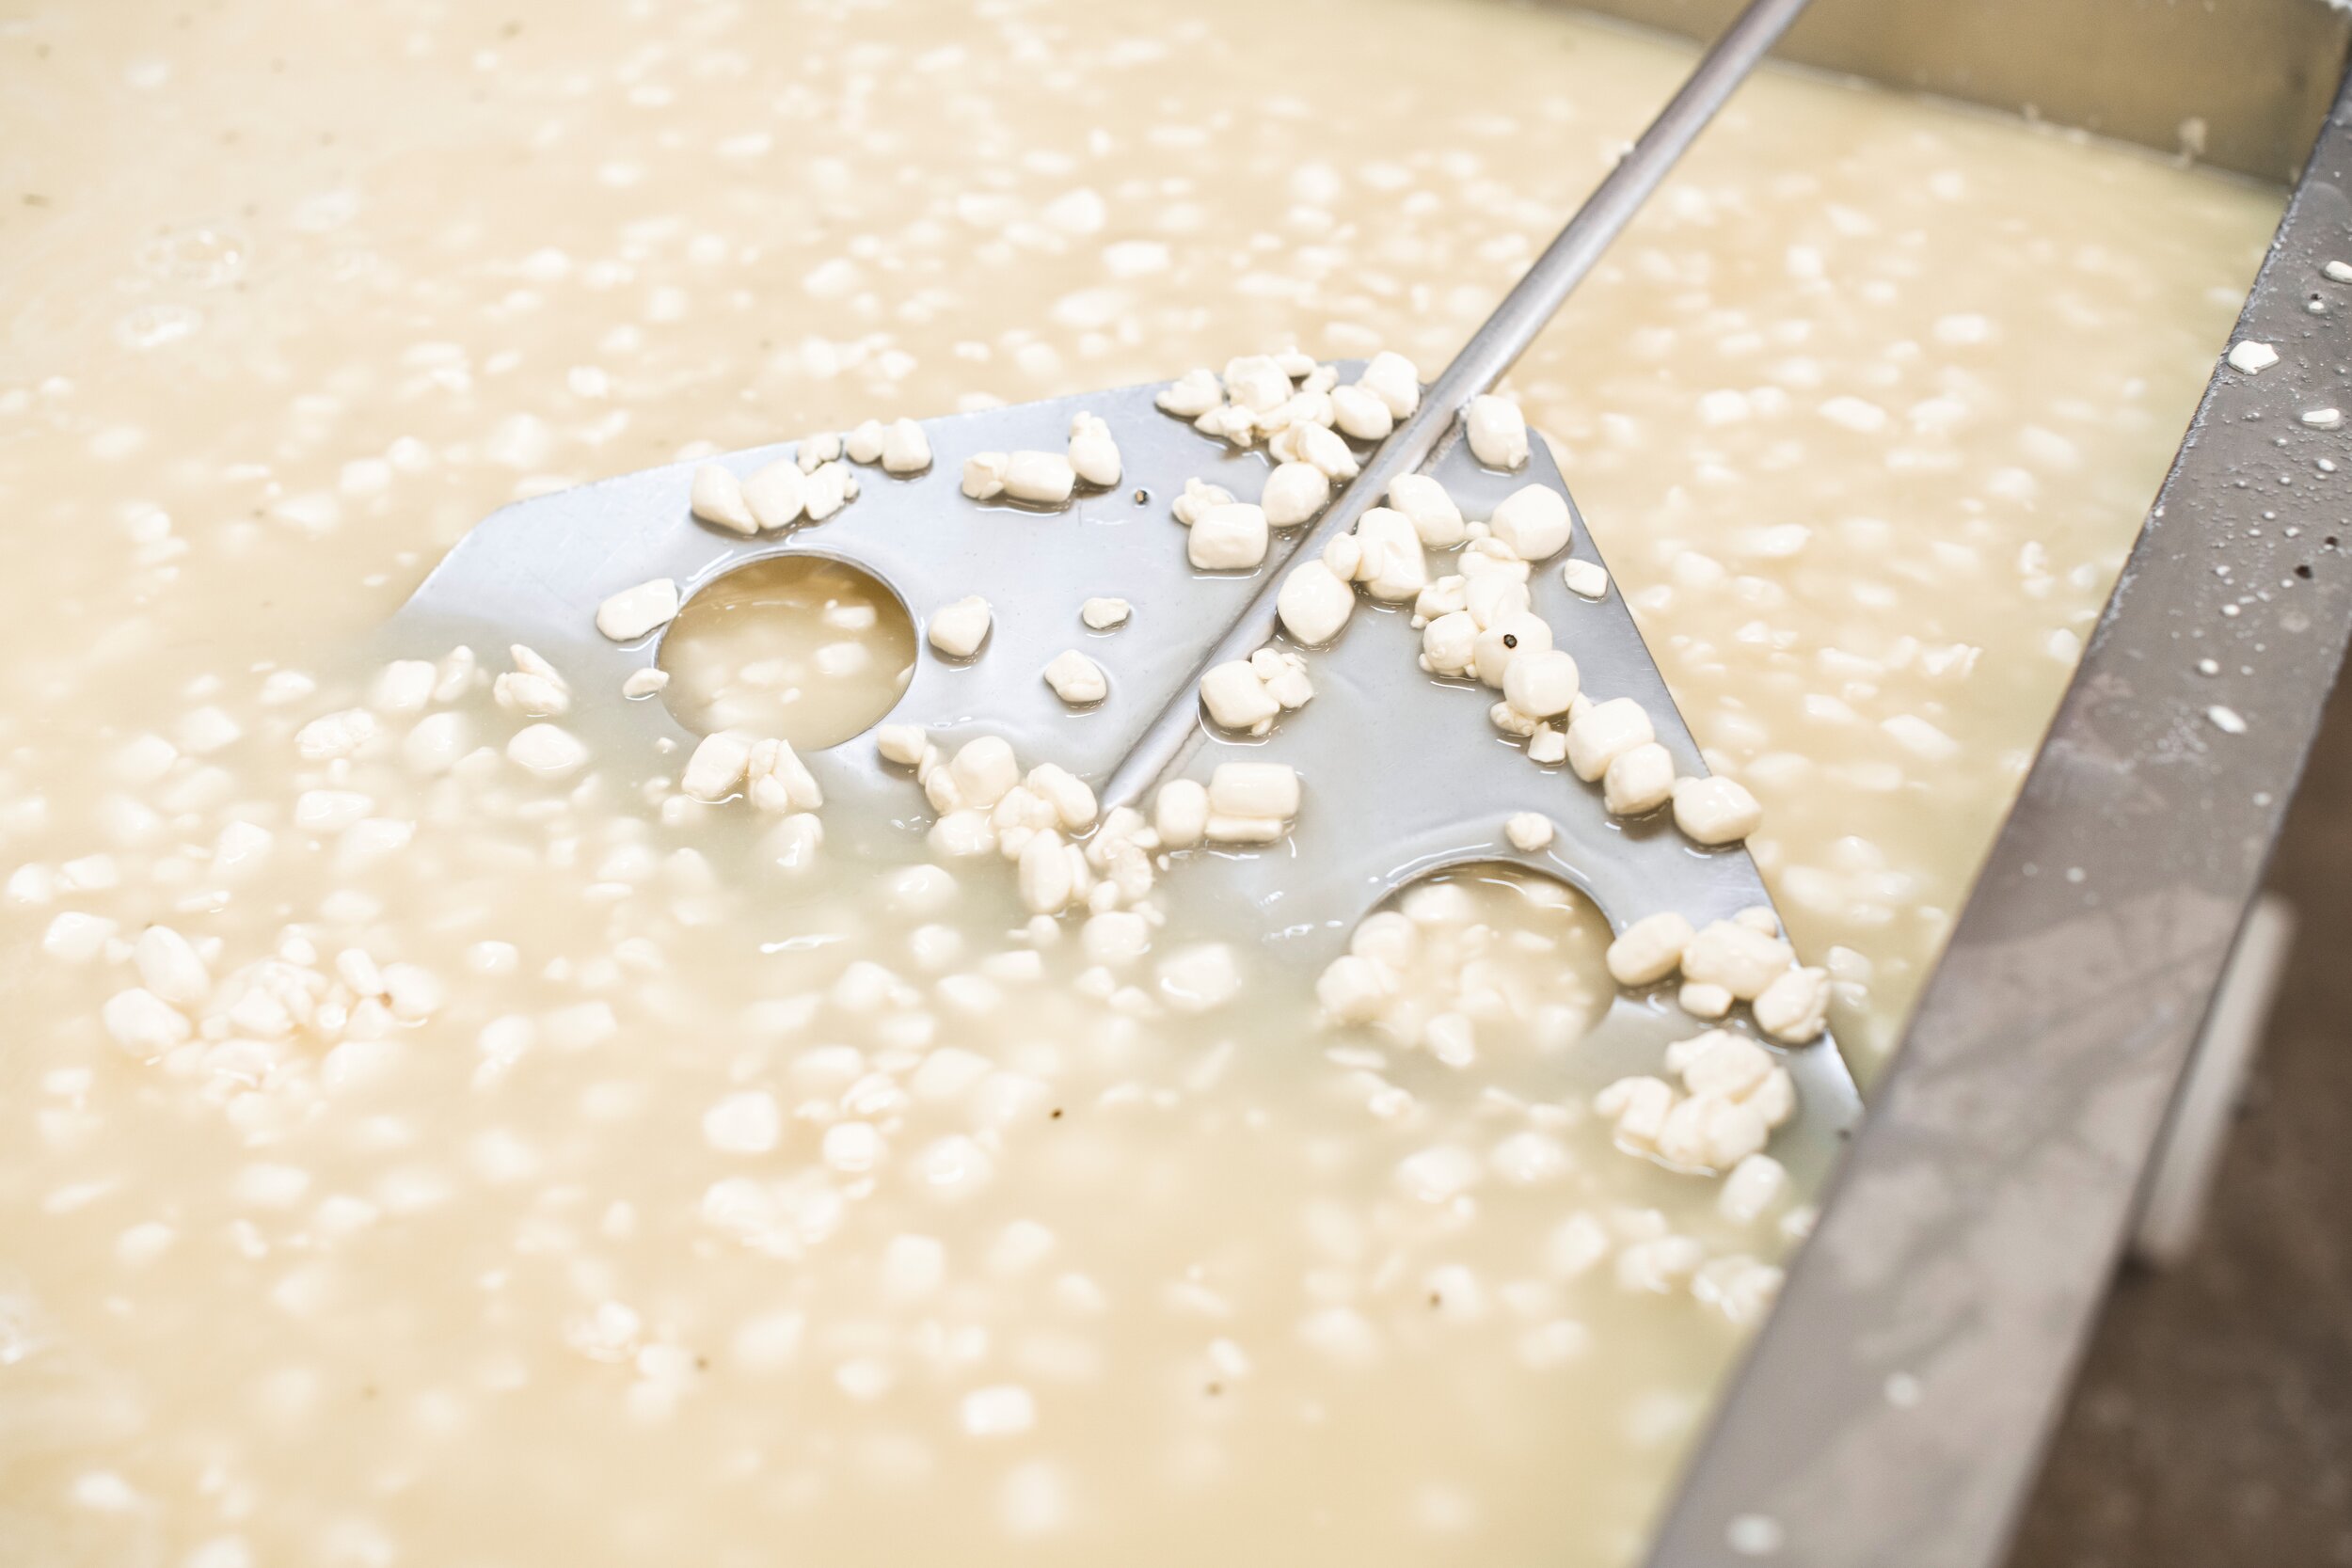 Checking Curd and Whey Resized.jpg